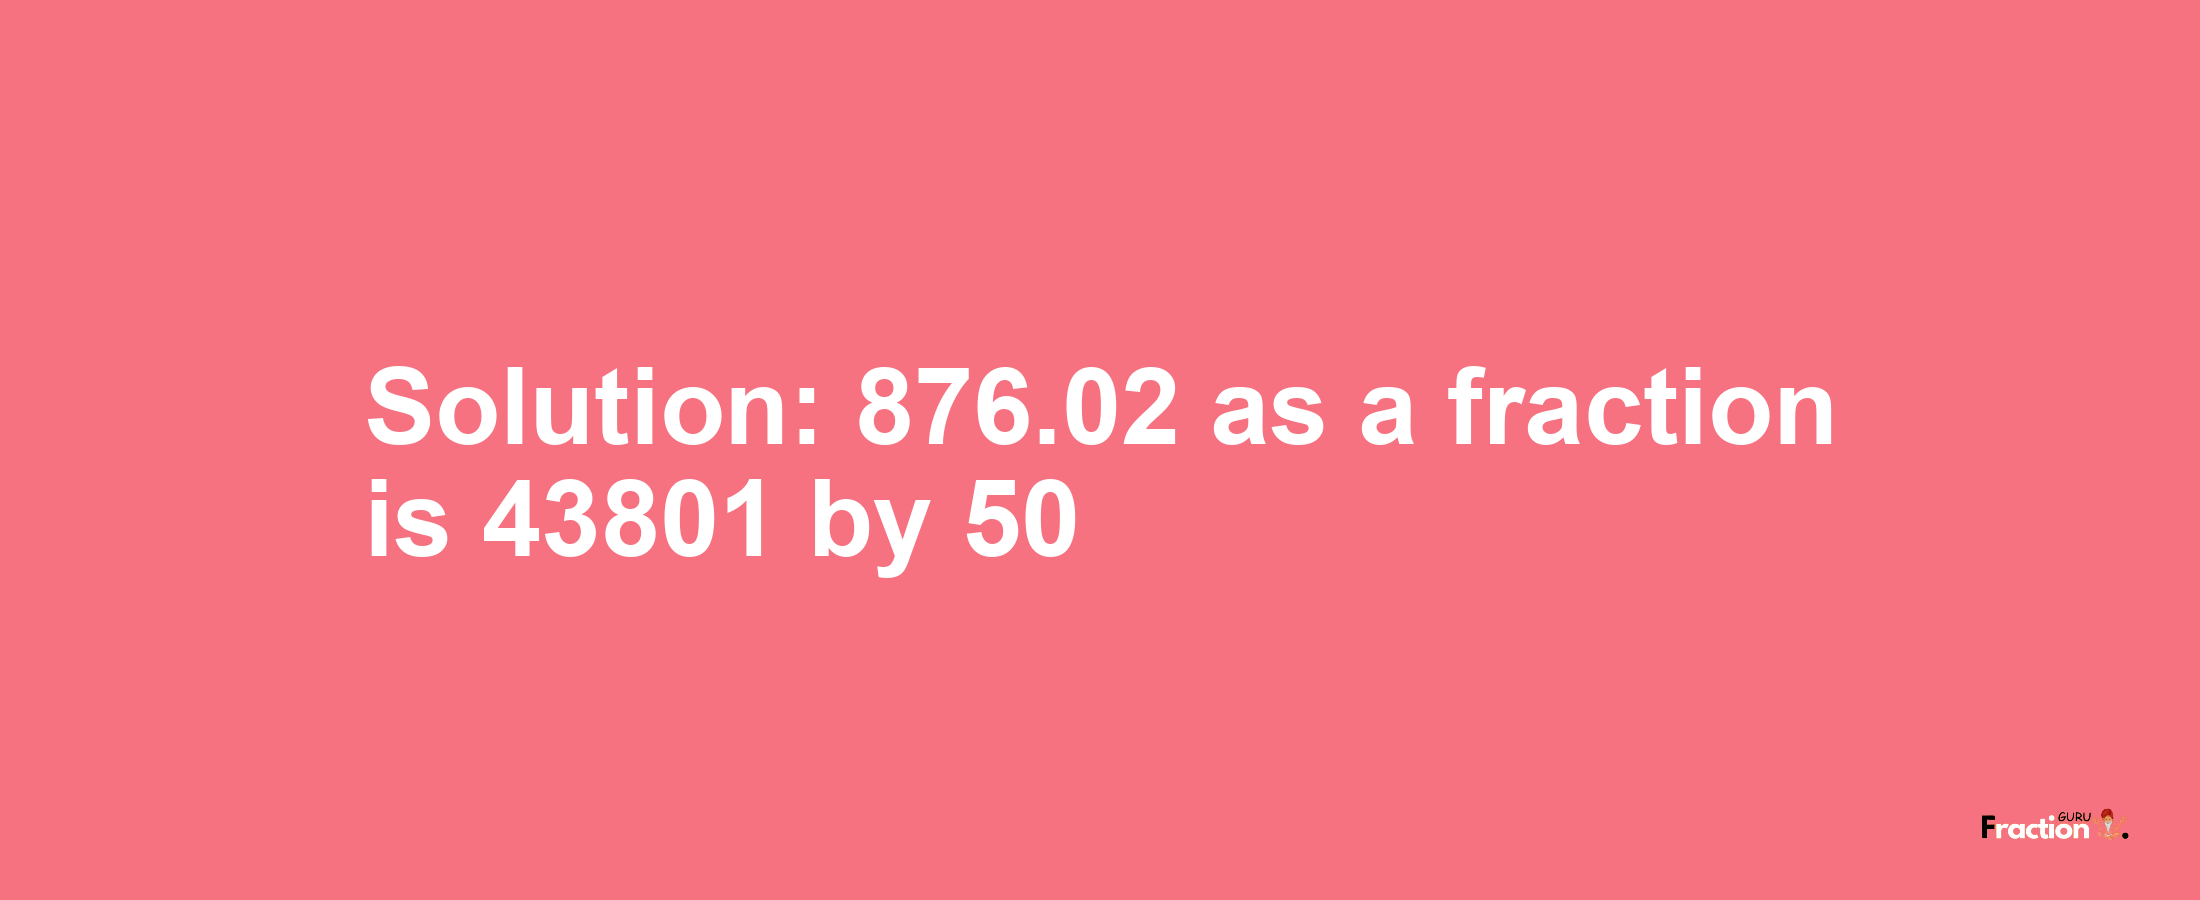 Solution:876.02 as a fraction is 43801/50